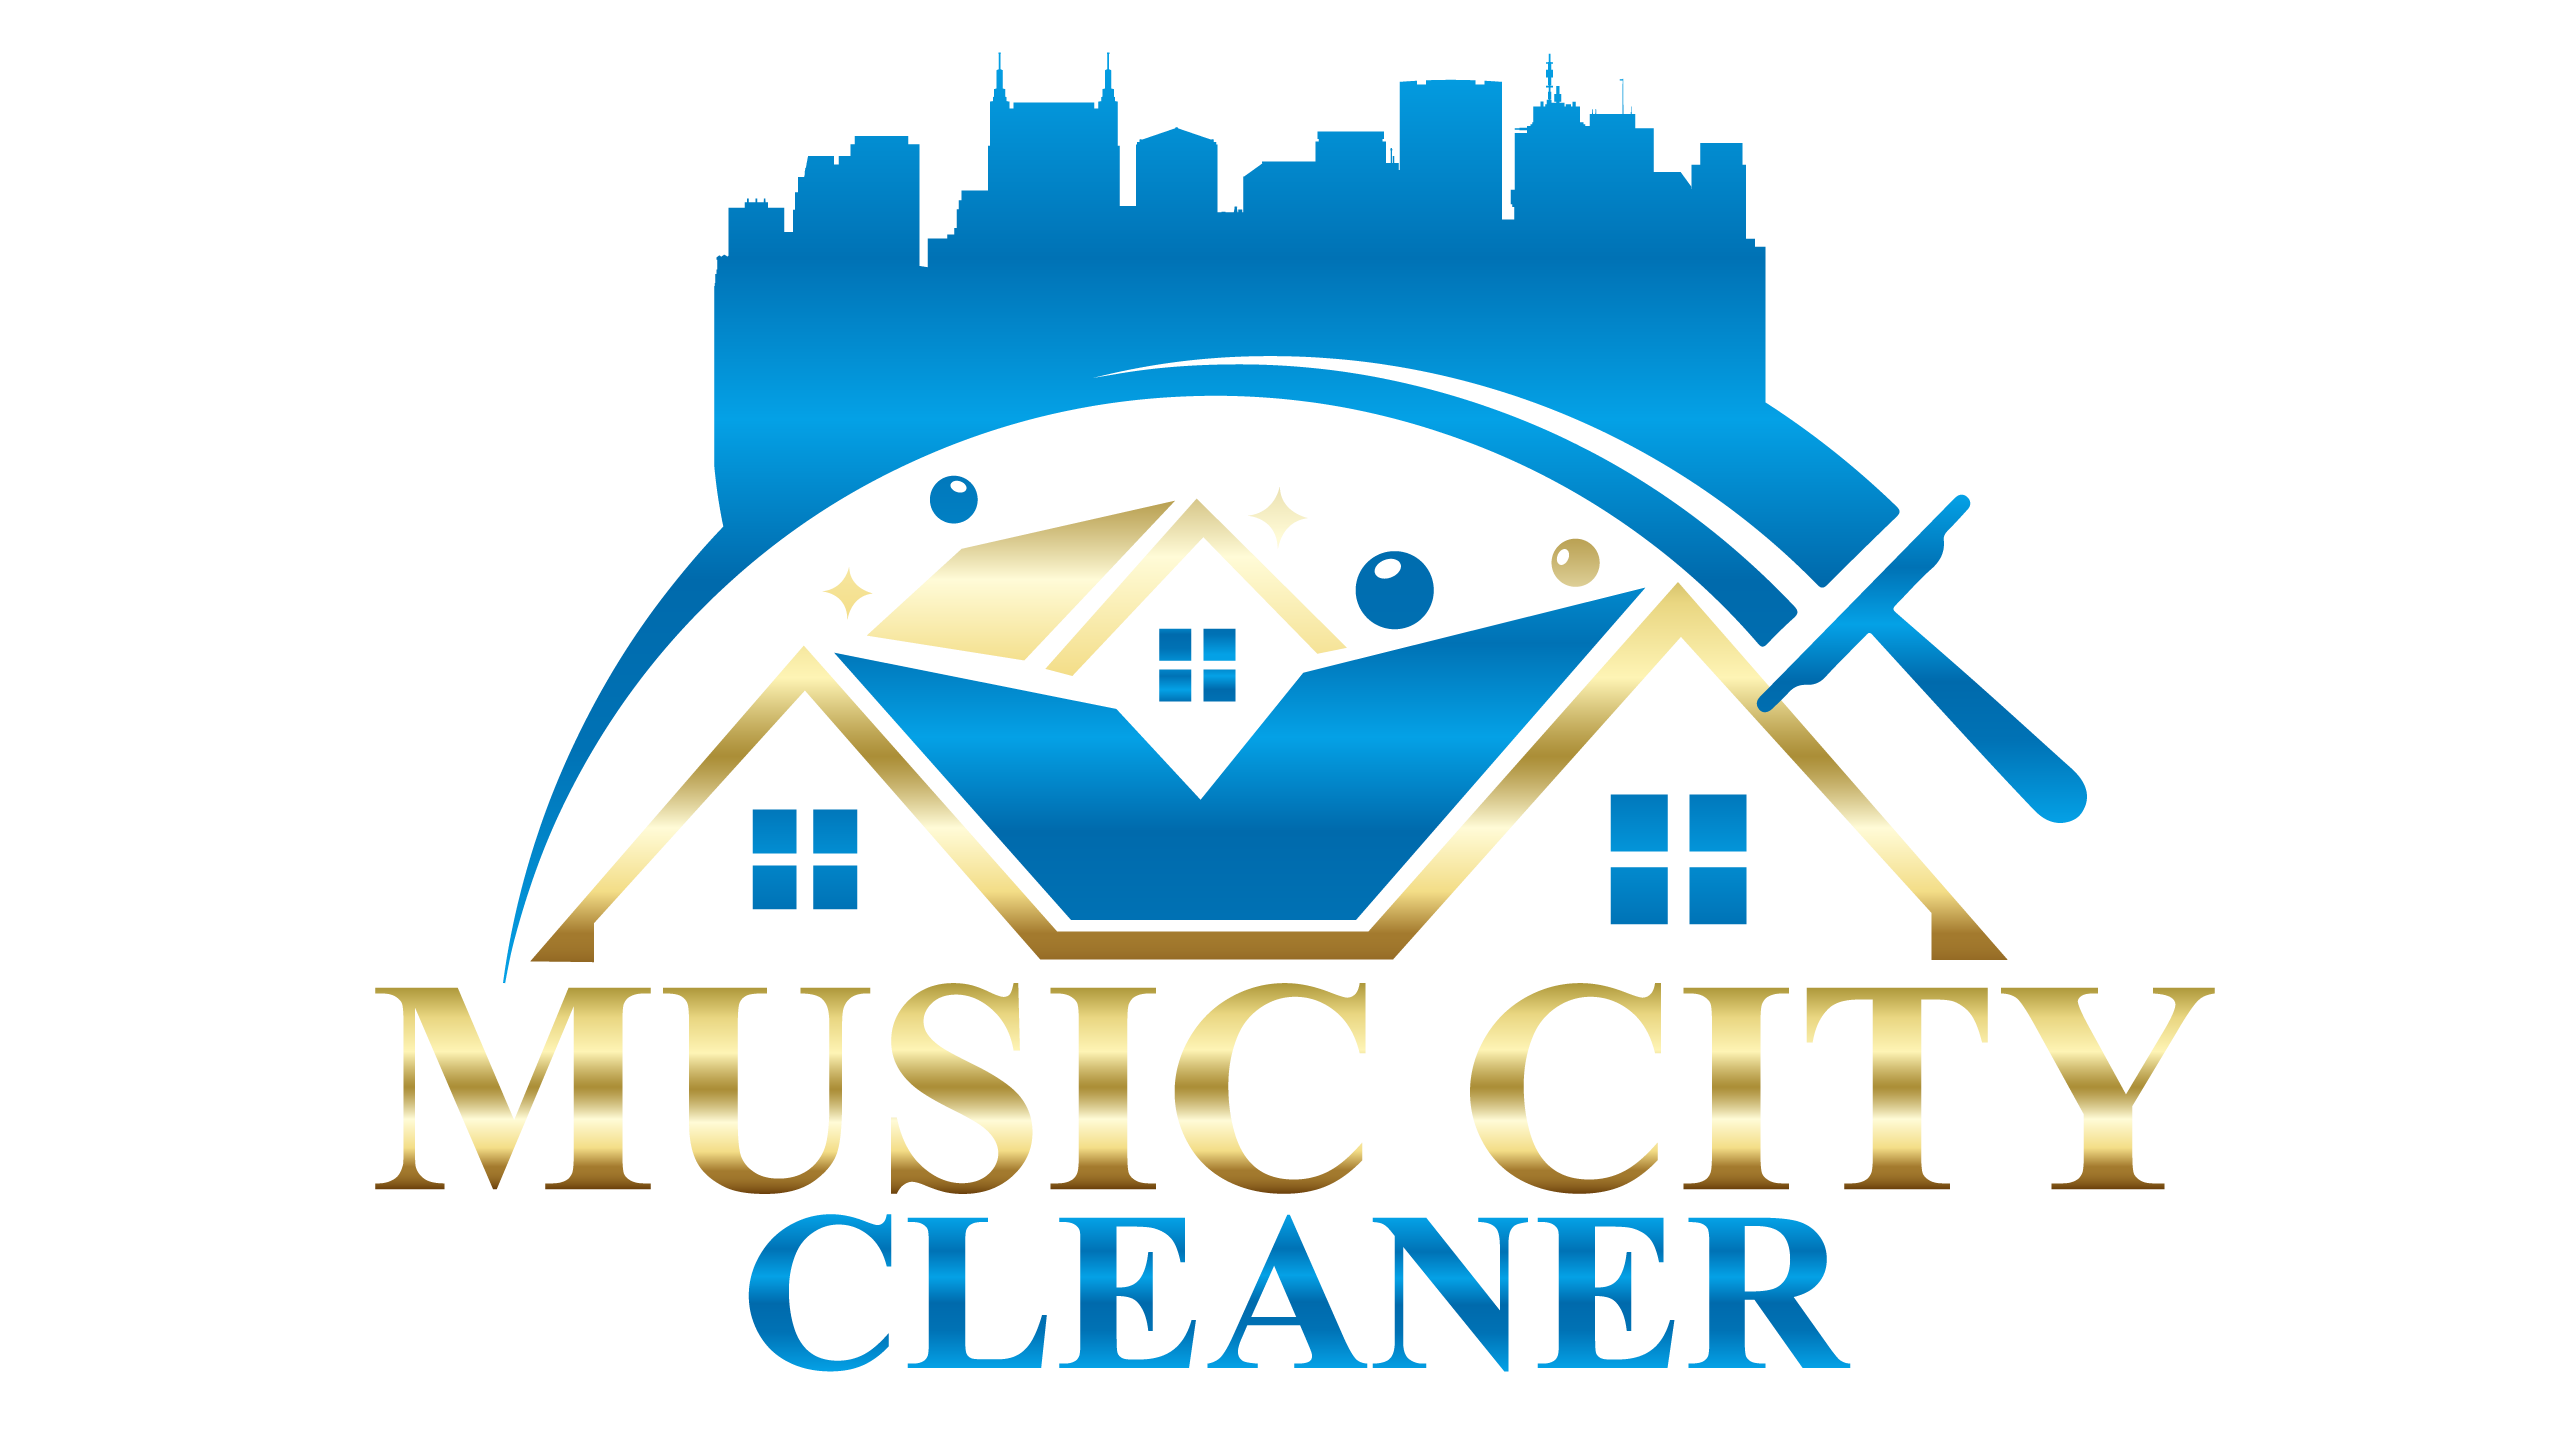 Music City Cleaner Cleaning Services in Nashville TN